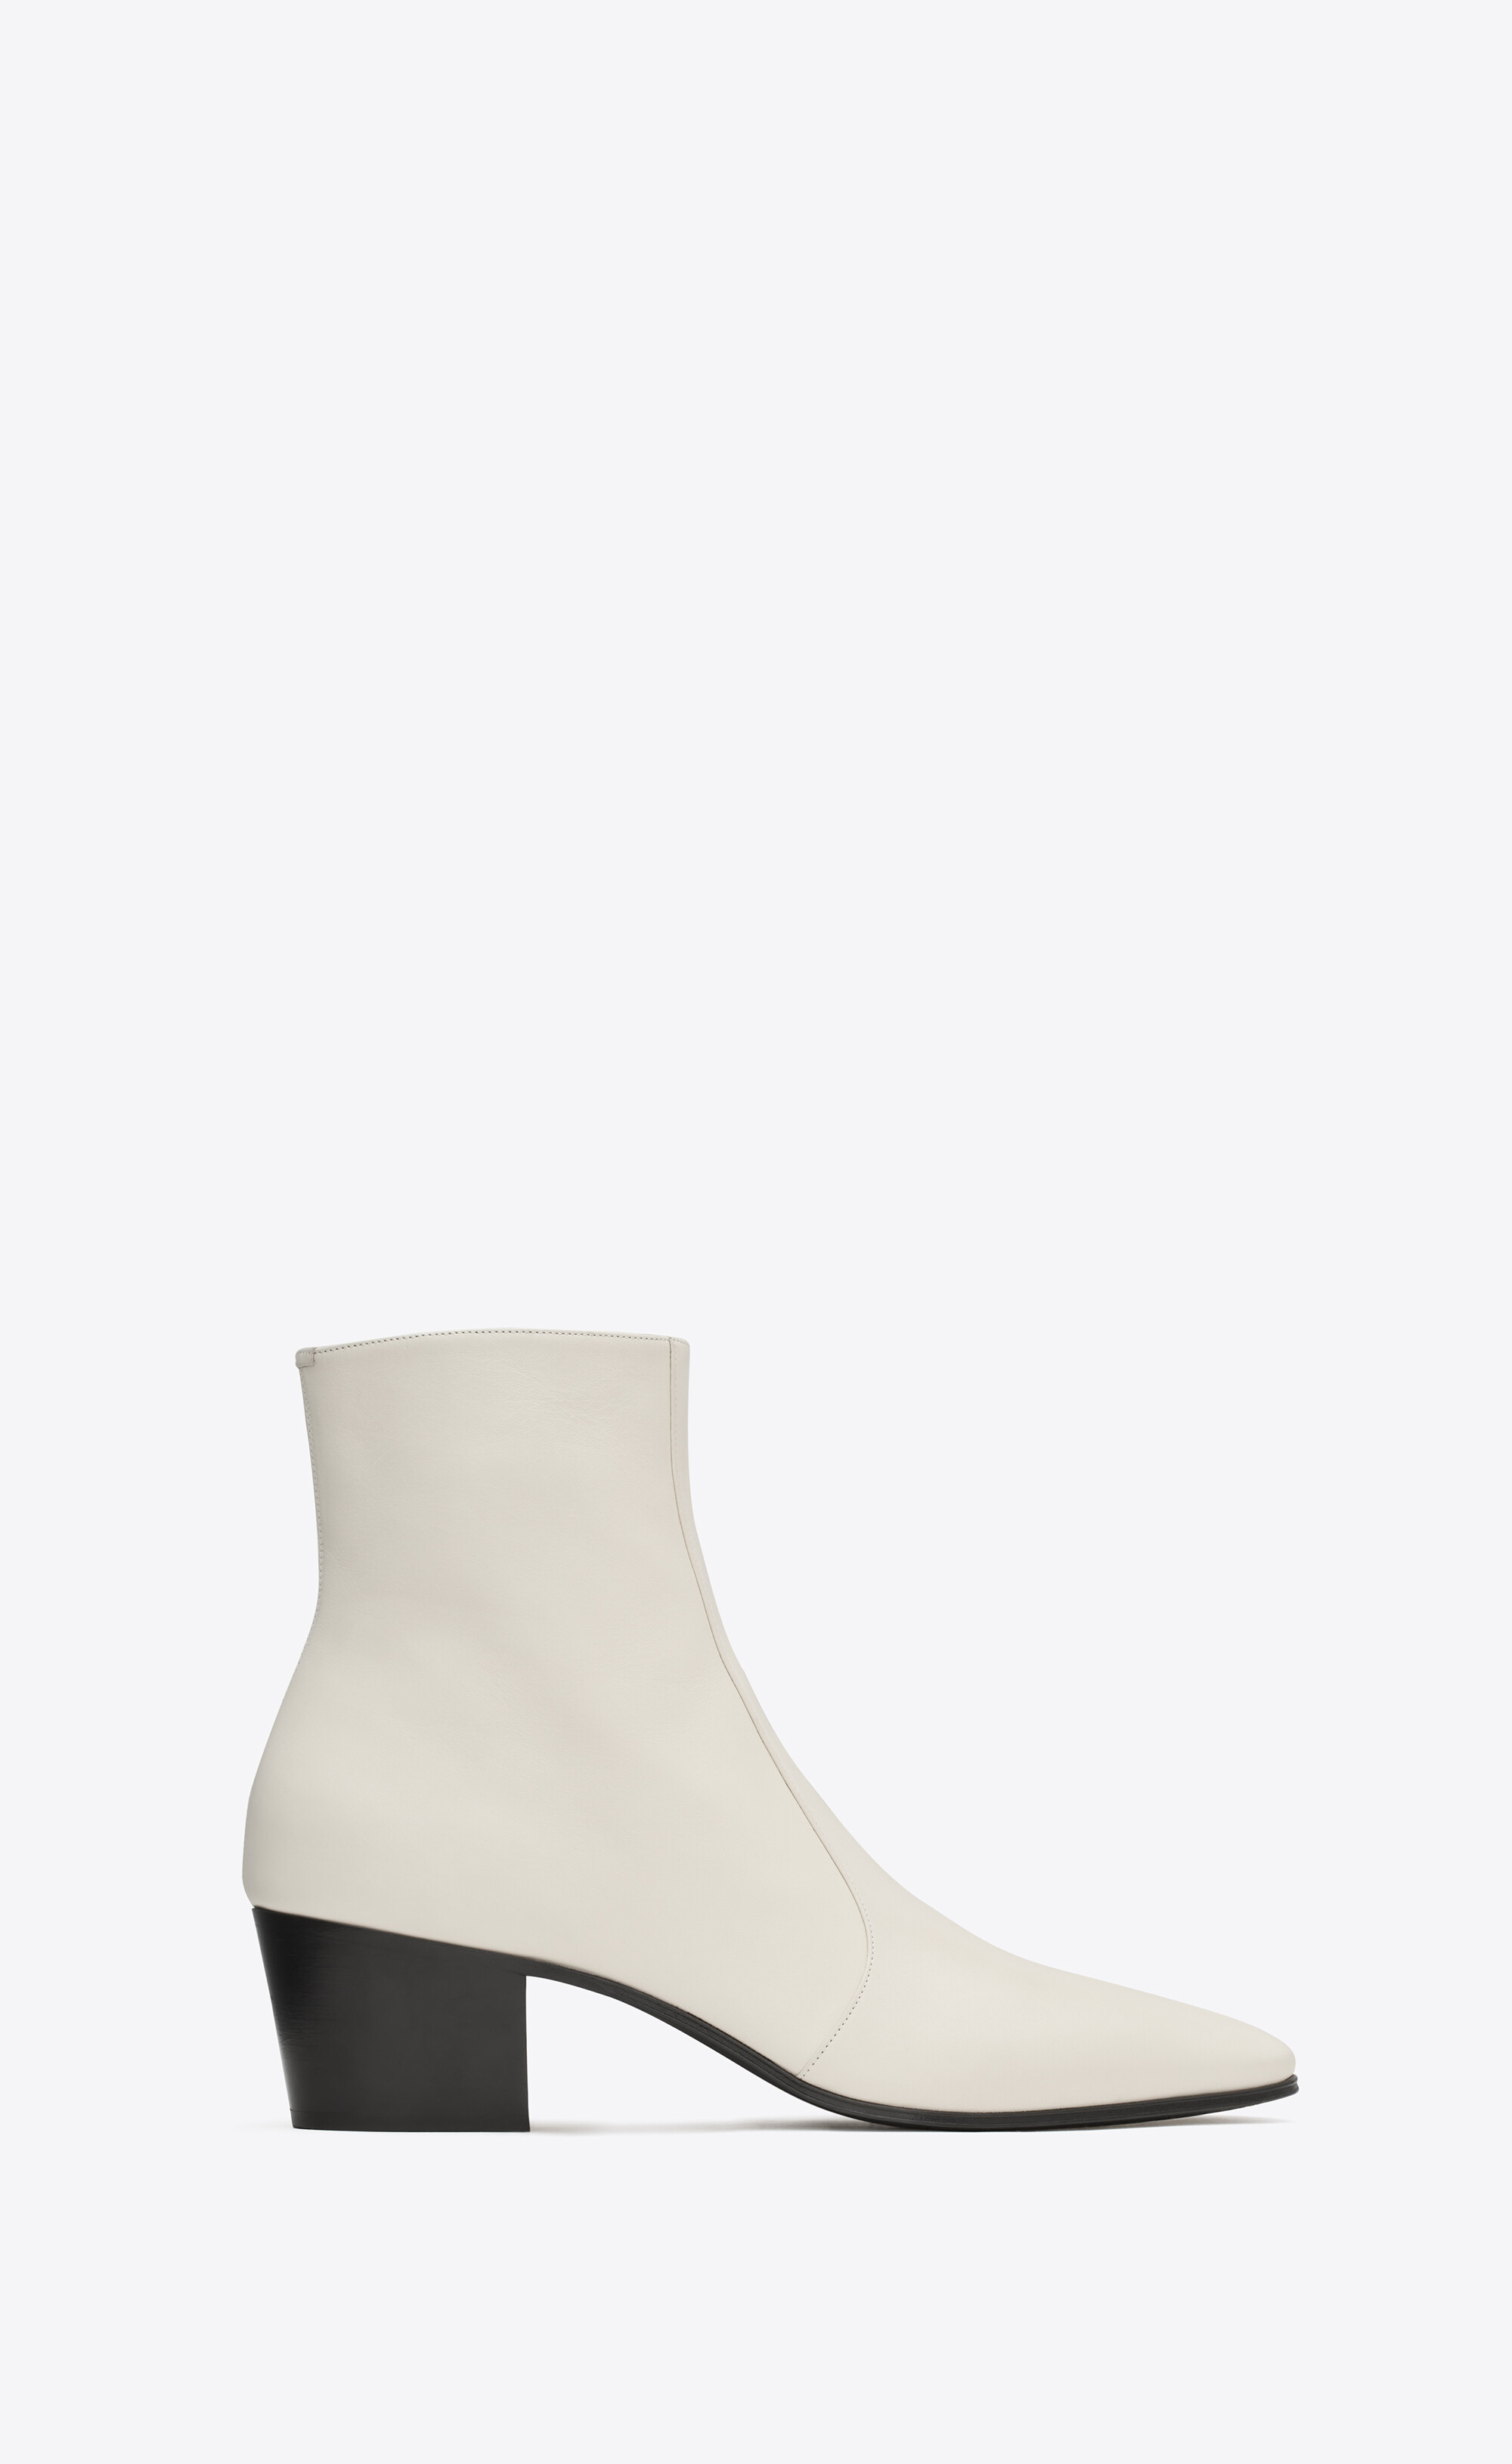 VASSILI zipped boots in smooth leather | Saint Laurent | YSL.com